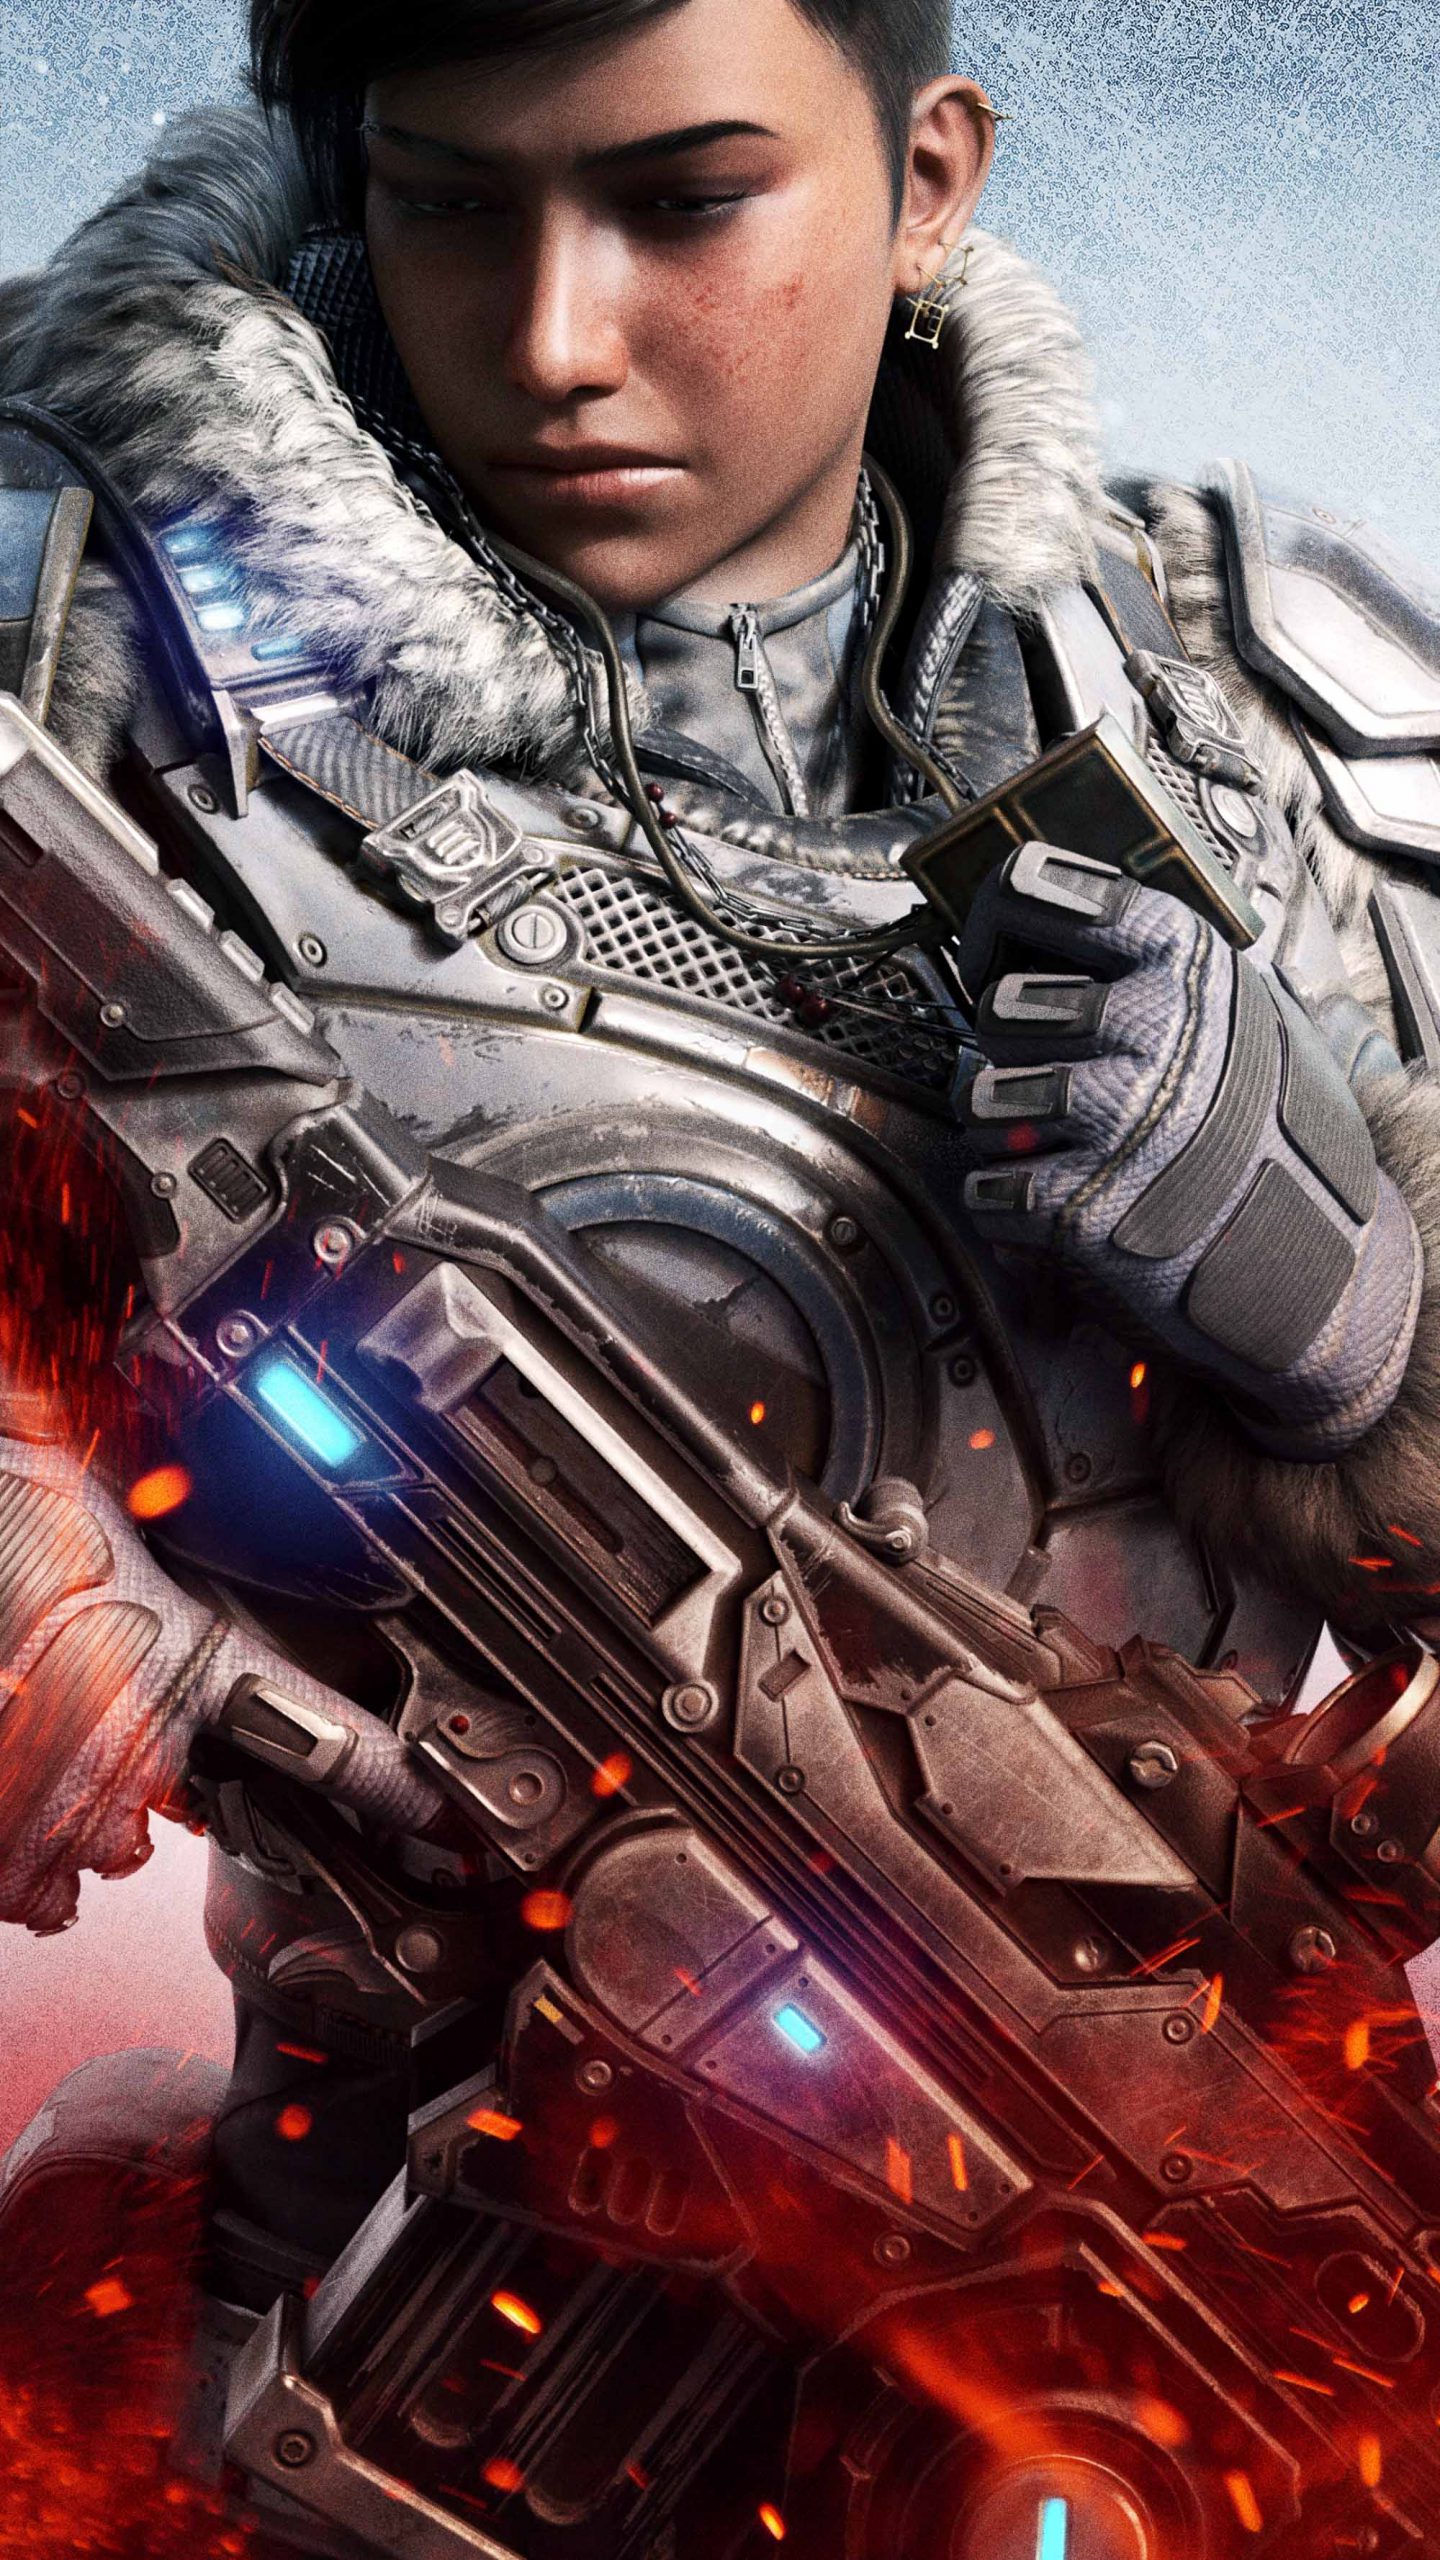 Gears 5 story DLC Hivebusters will see a new squad tell its story